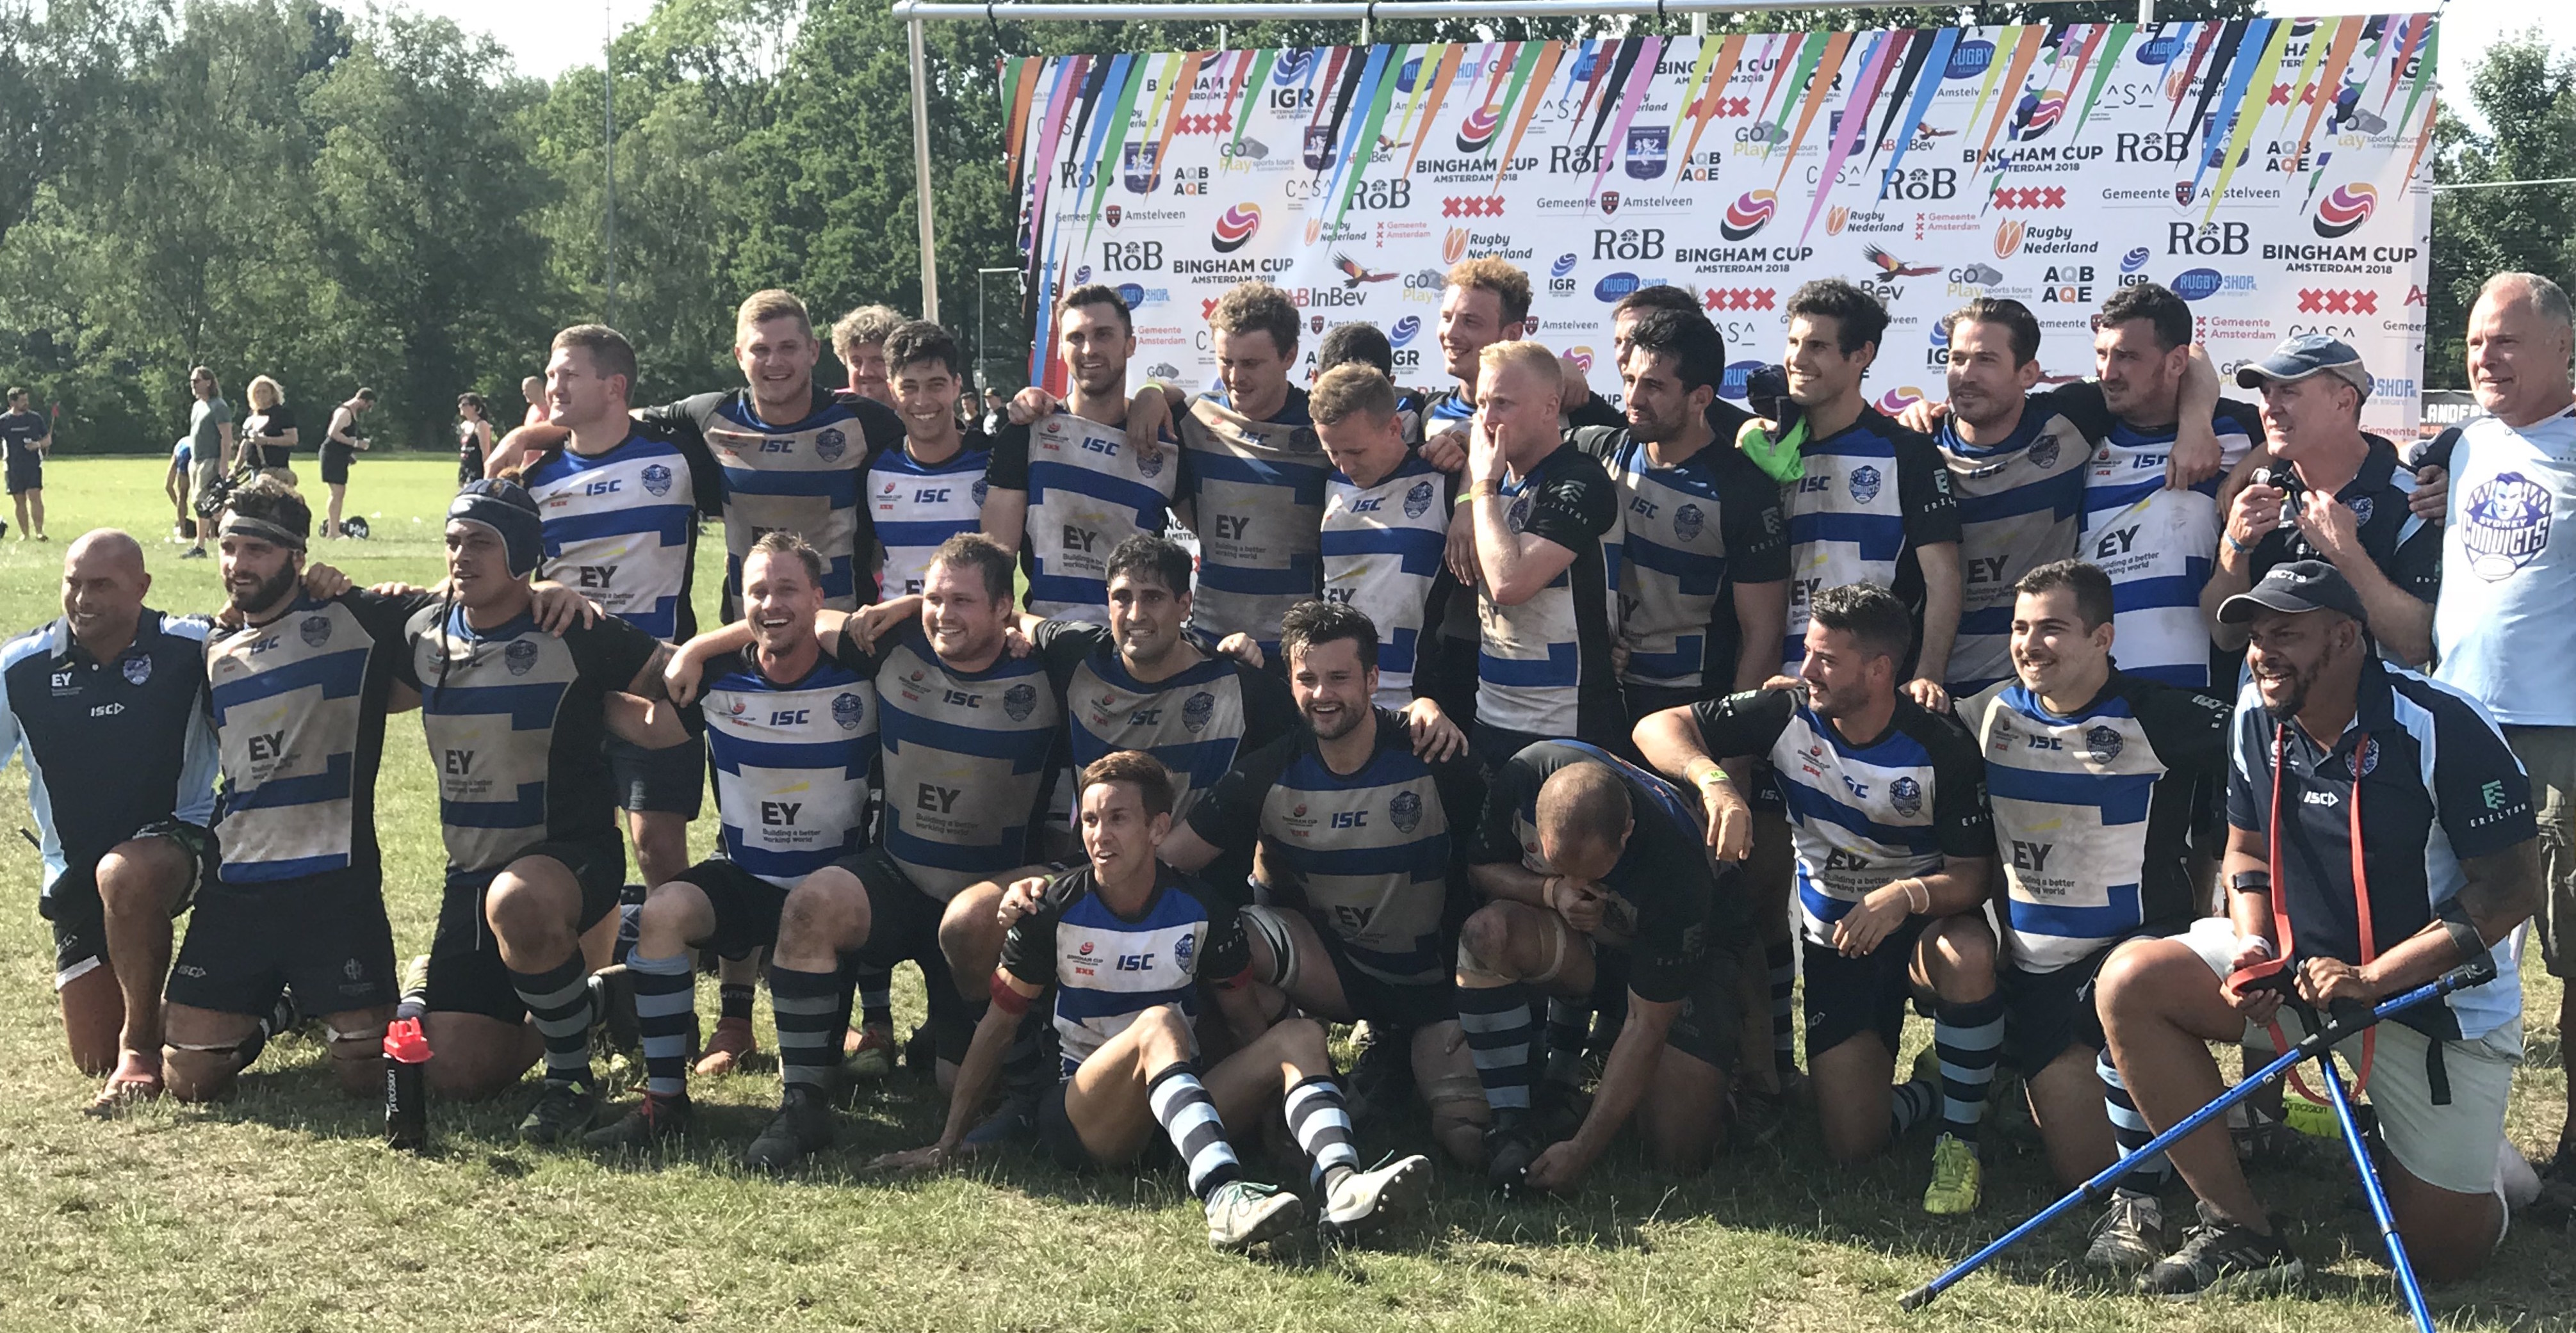 ‘We are extremely proud’: Sydney Convicts reflect on their Bingham Cup win